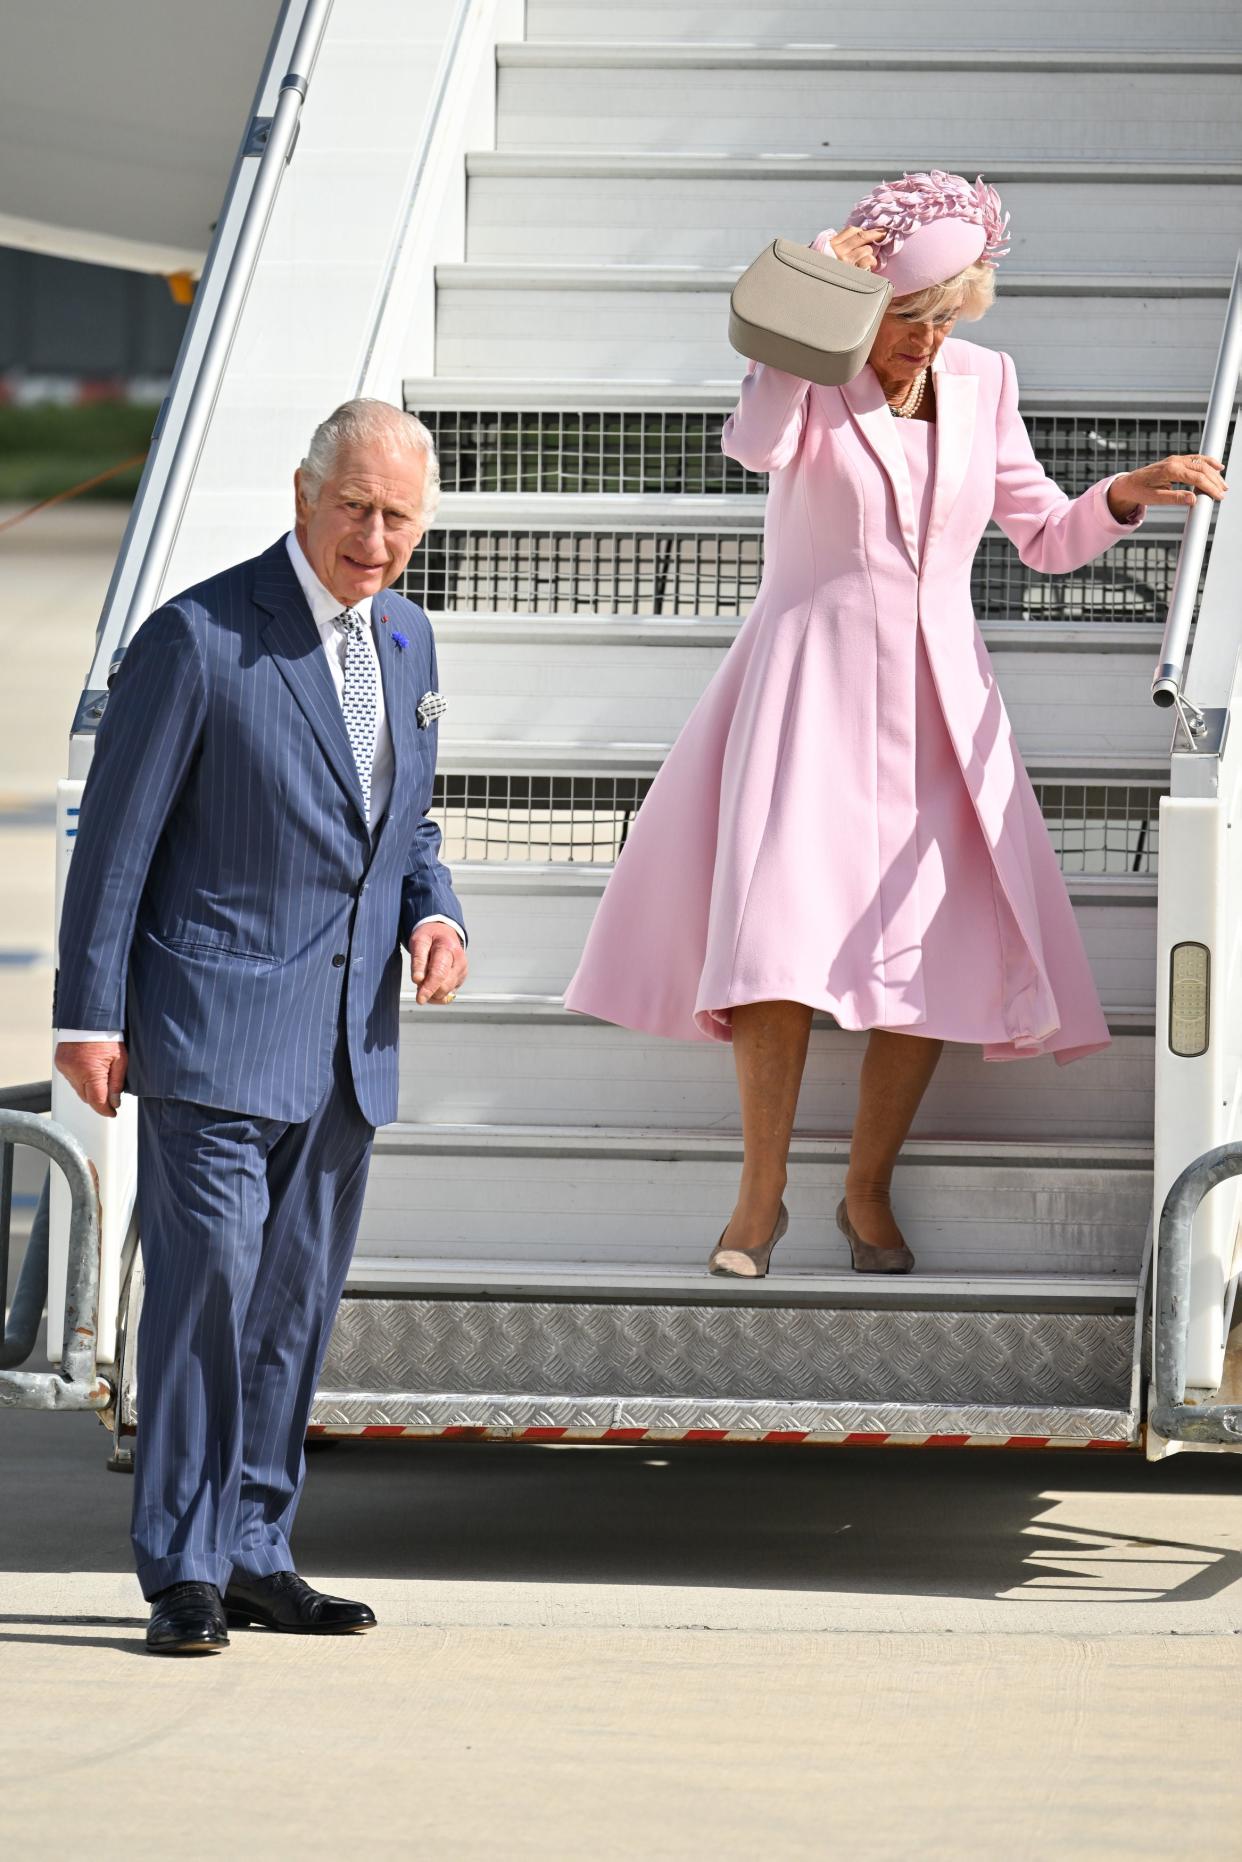 Mind the step - King Charles waited for Queen Camilla as they disembarked the aircraft (PA)